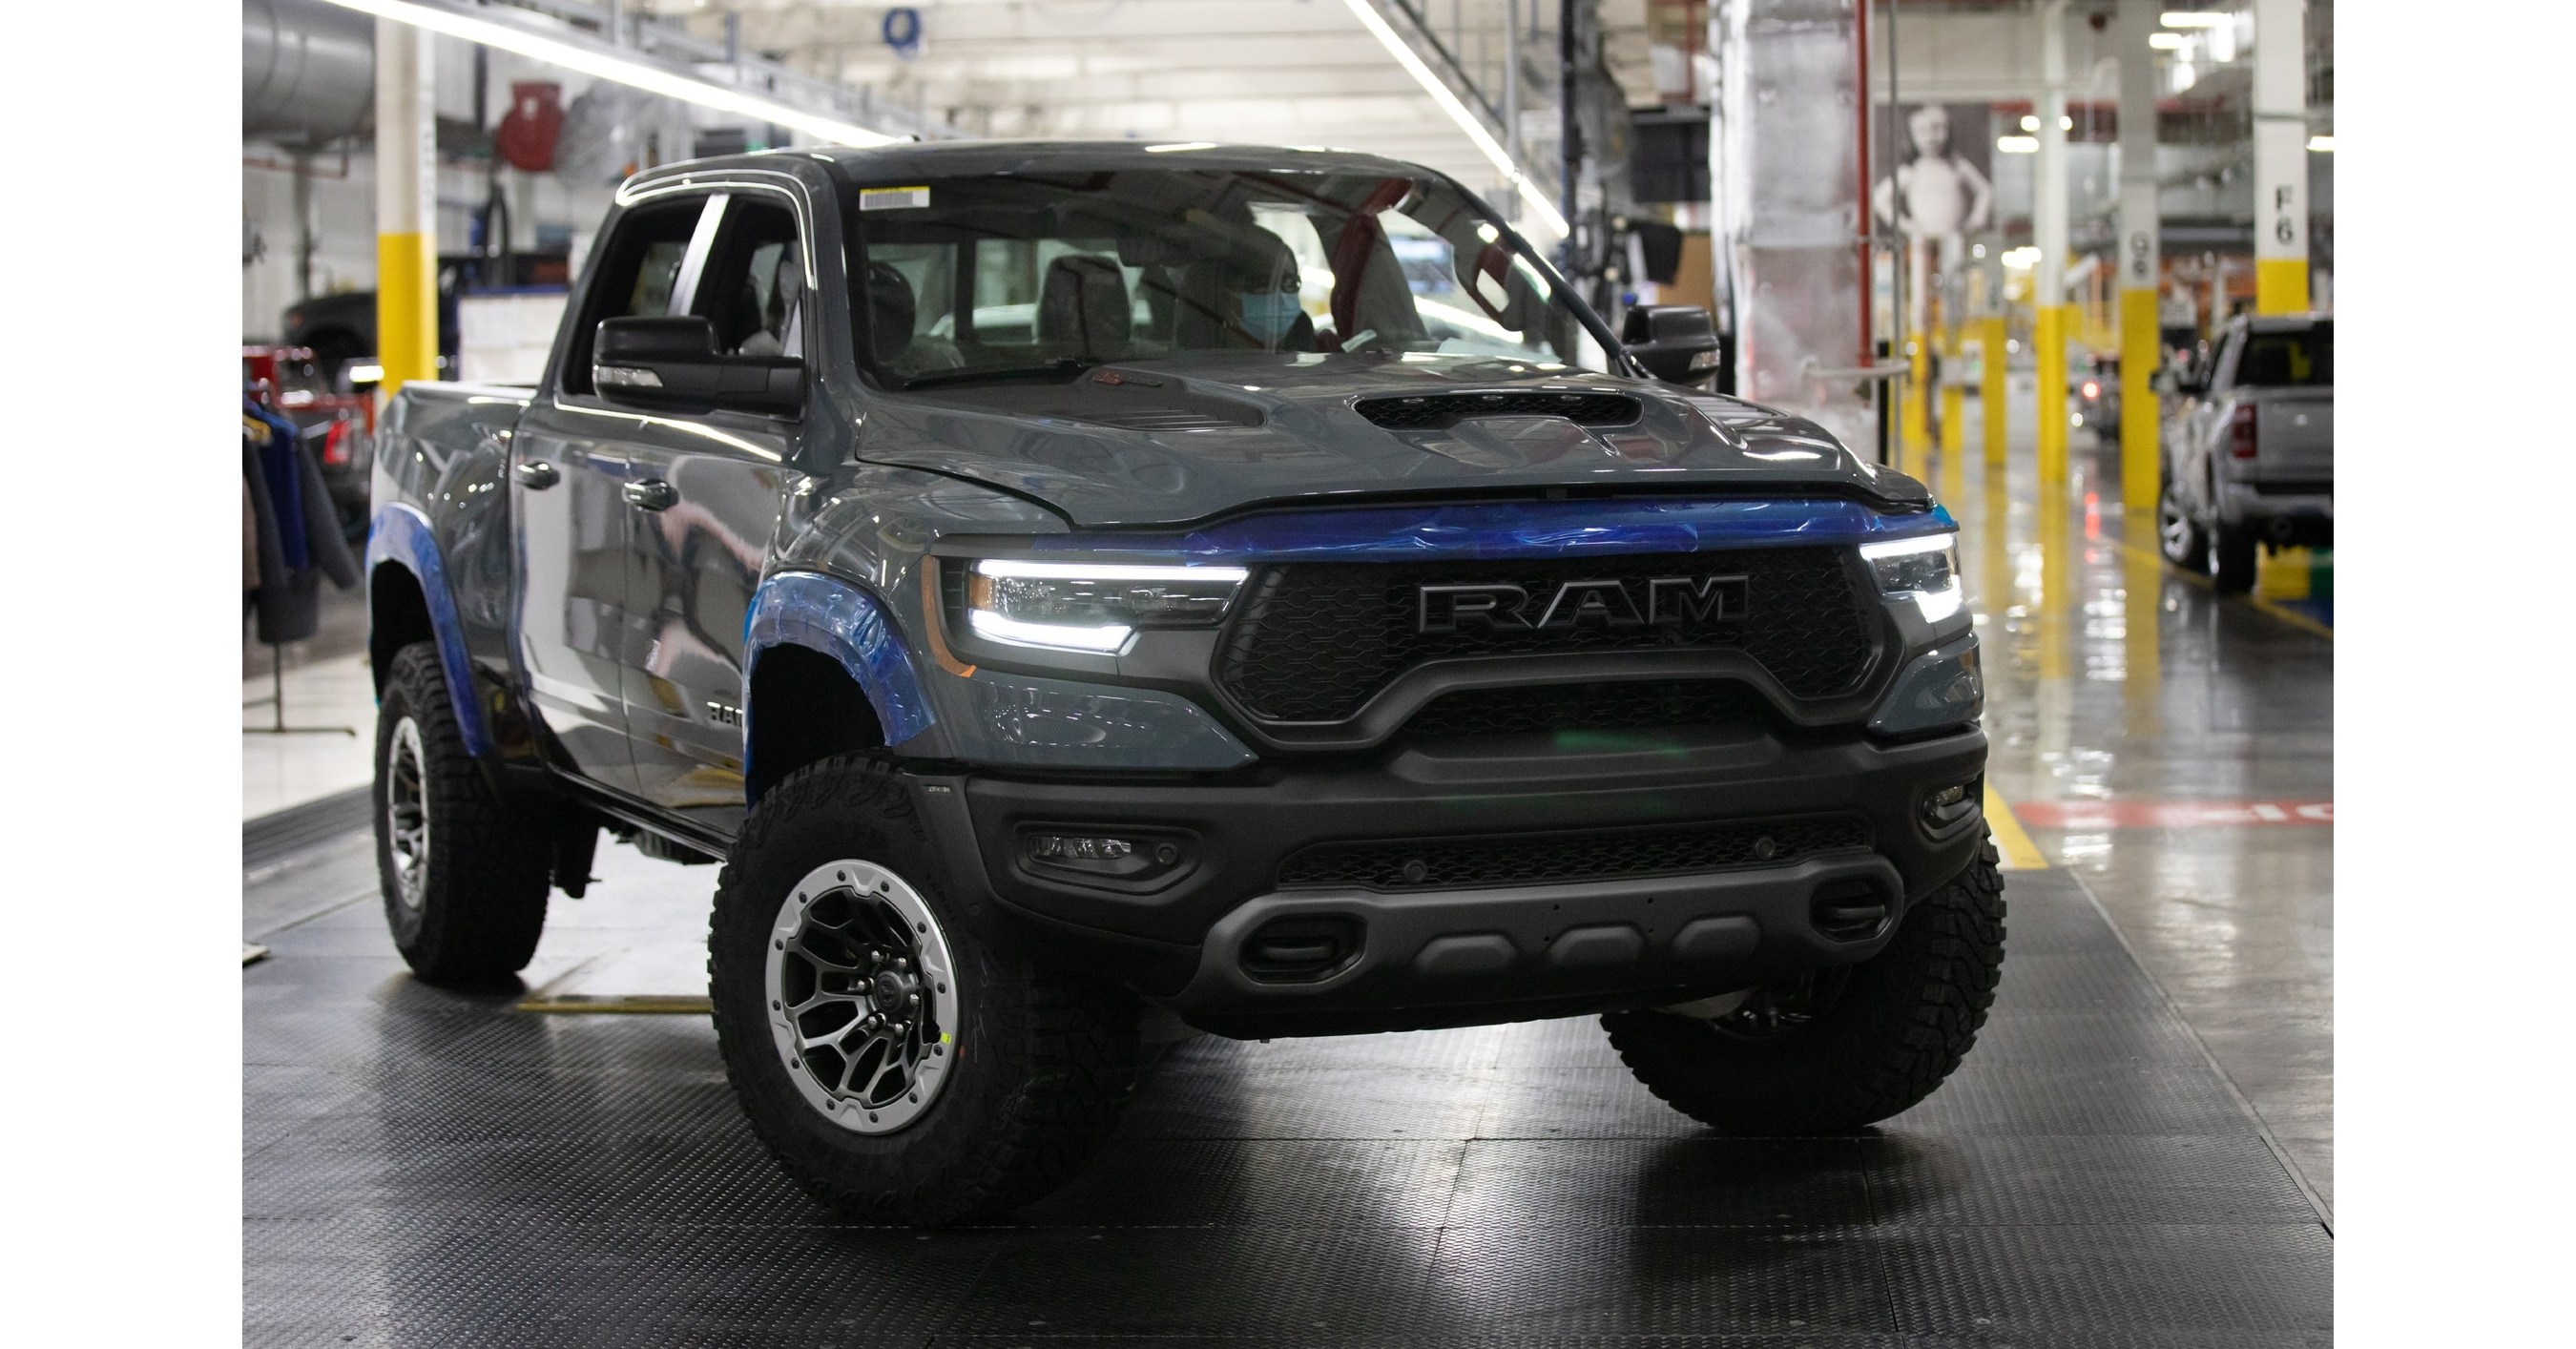 Dodge, Ram thrive 5 years after split